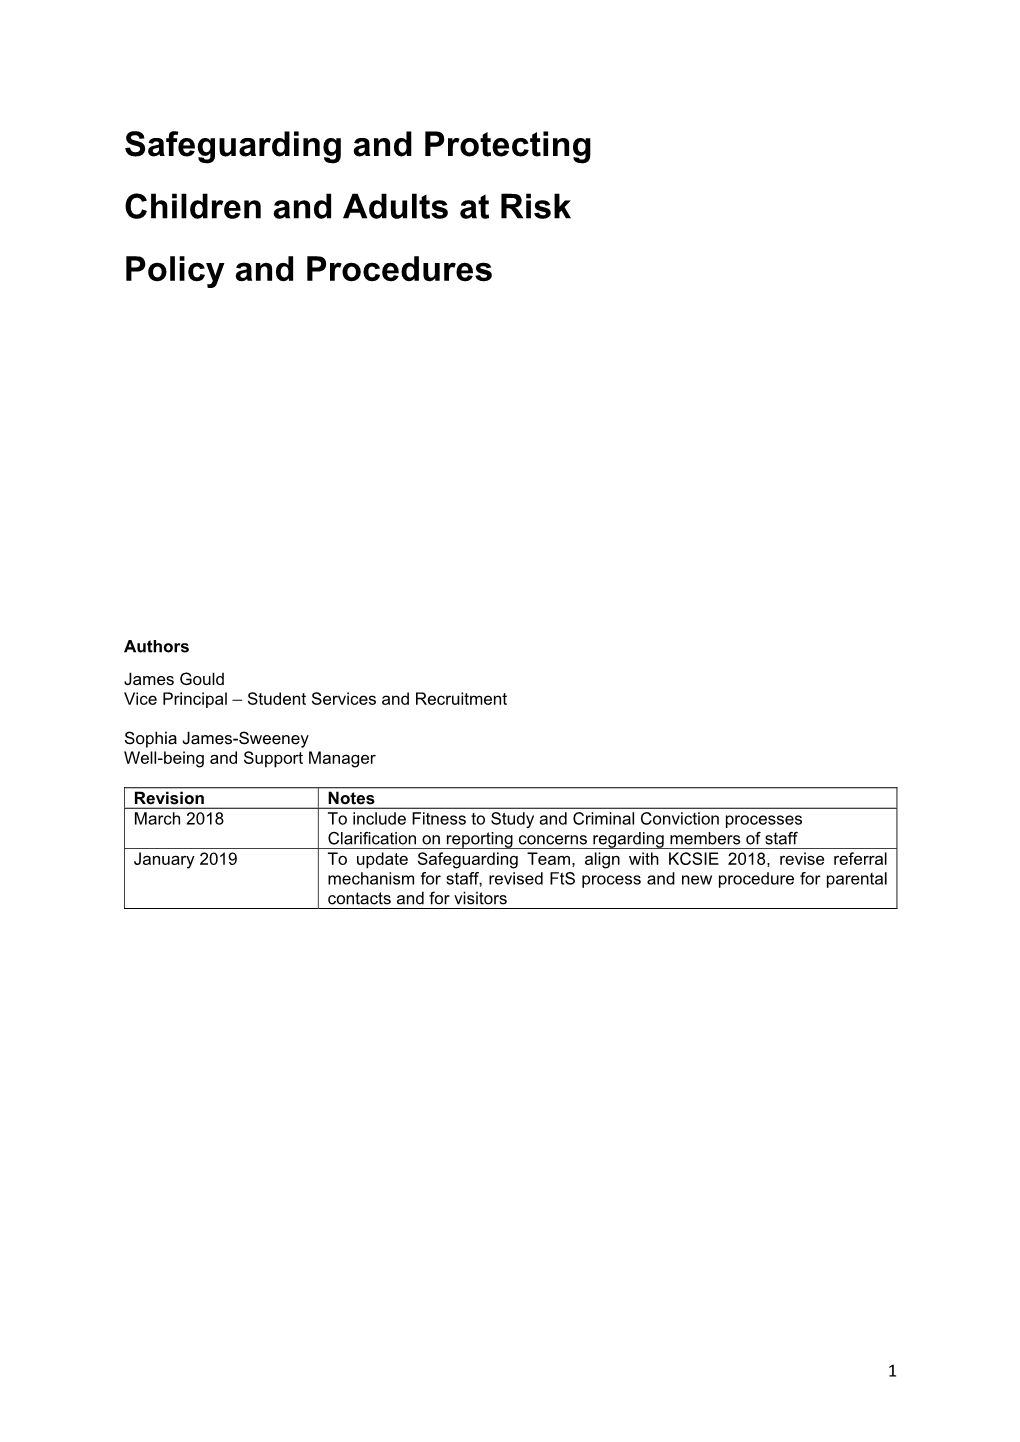 Safeguarding and Protecting Children and Adults at Risk Policy and Procedures